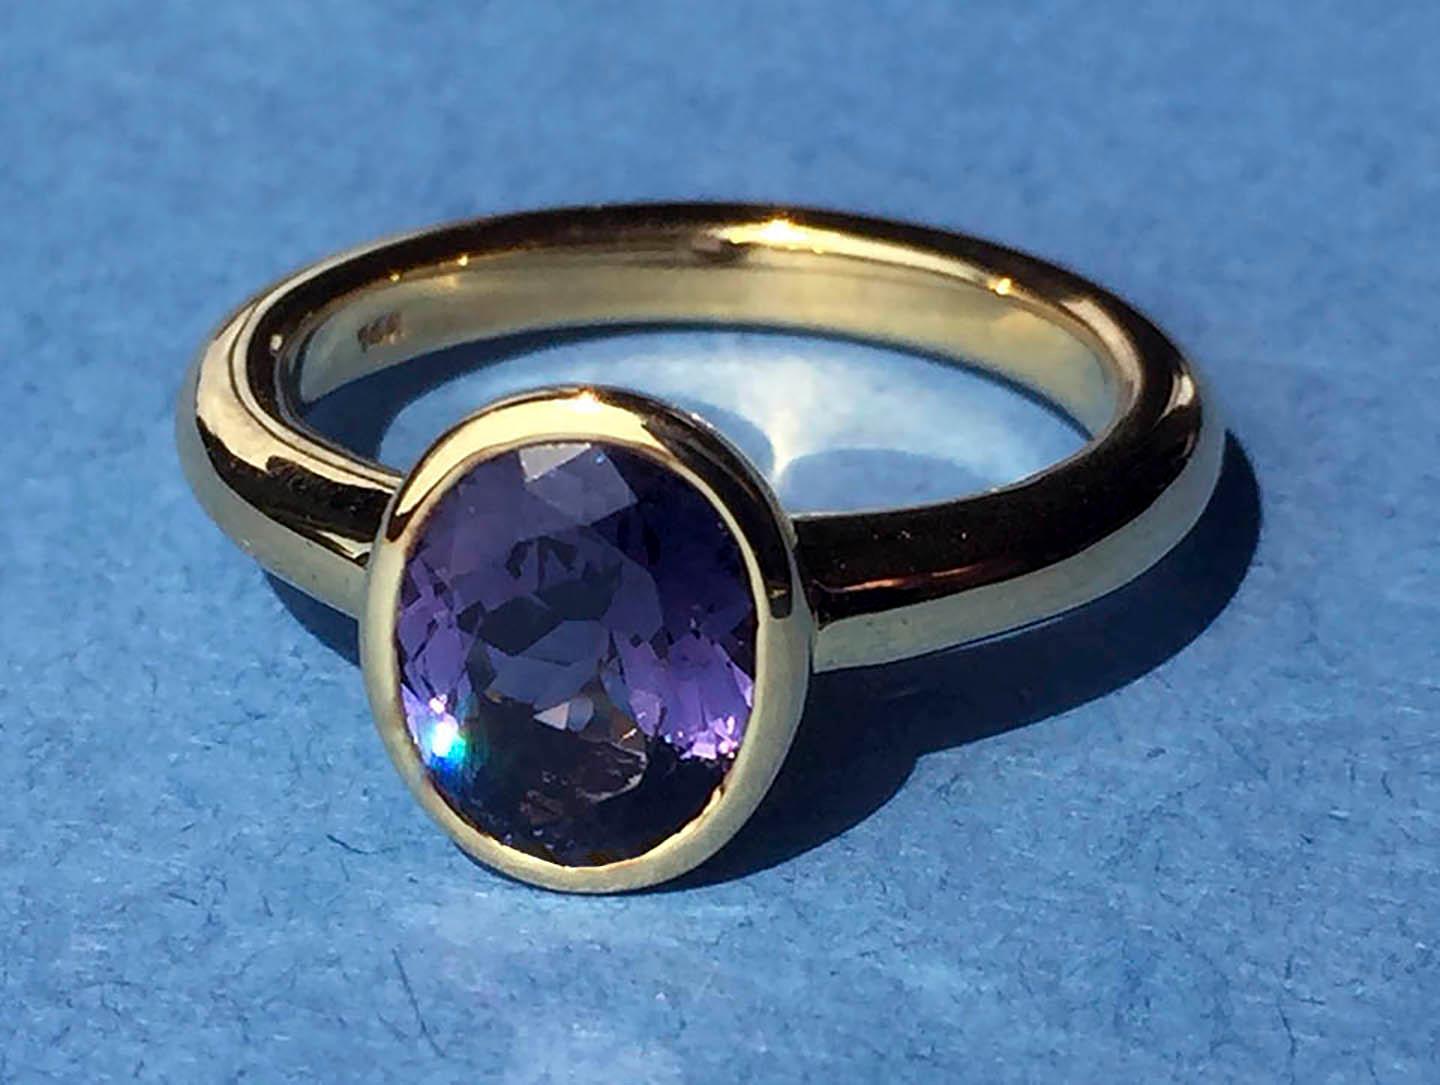 A Kary Adam Designed Purple Spinel Ring Set in 14 Karat Yellow Gold with a 1.3 Carat Oval Purple Spinel. Gold weight is 5.2 Grams, Ring Size is 6 USA

Originally from San Diego, California, Kary Adam lived in the “Gem Capital of the World” -